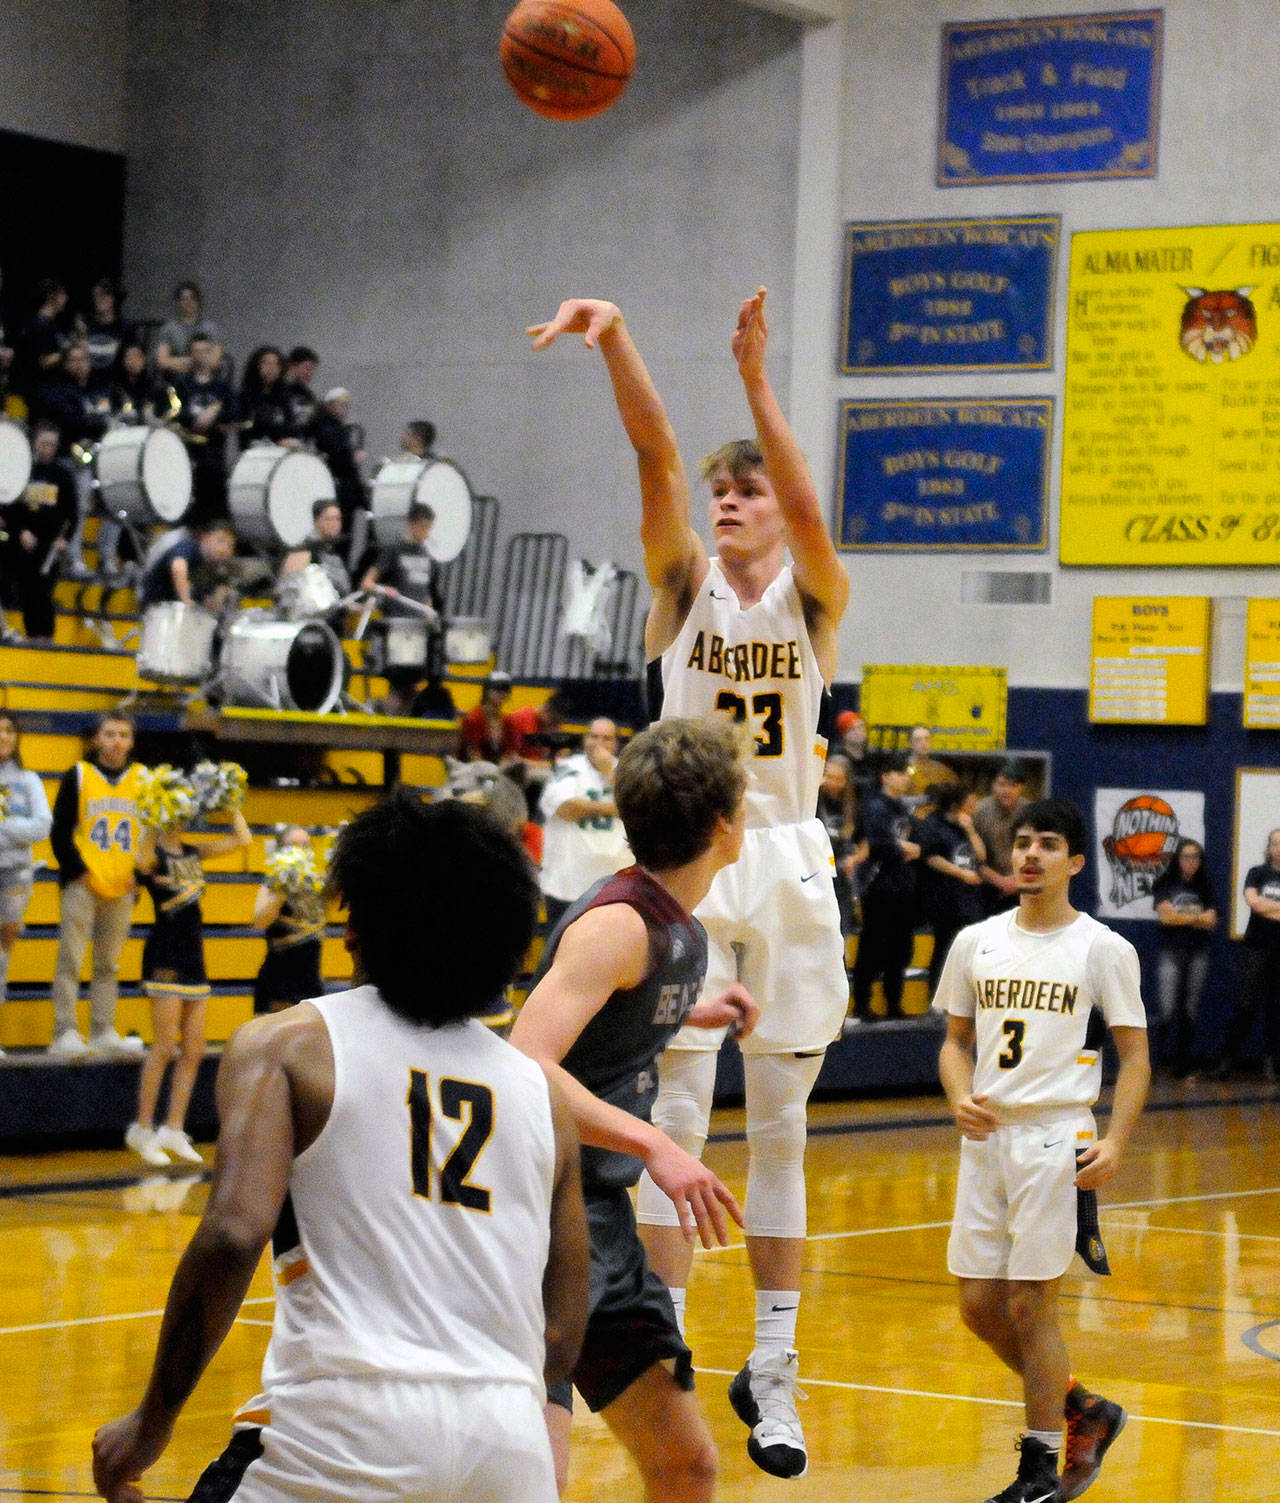 Aberdeen’s Wyatt Johnson takes a jumper from the free throw line in the fourth quarter against WF West on Thursday. (Hasani Grayson | Grays Harbor News Group)